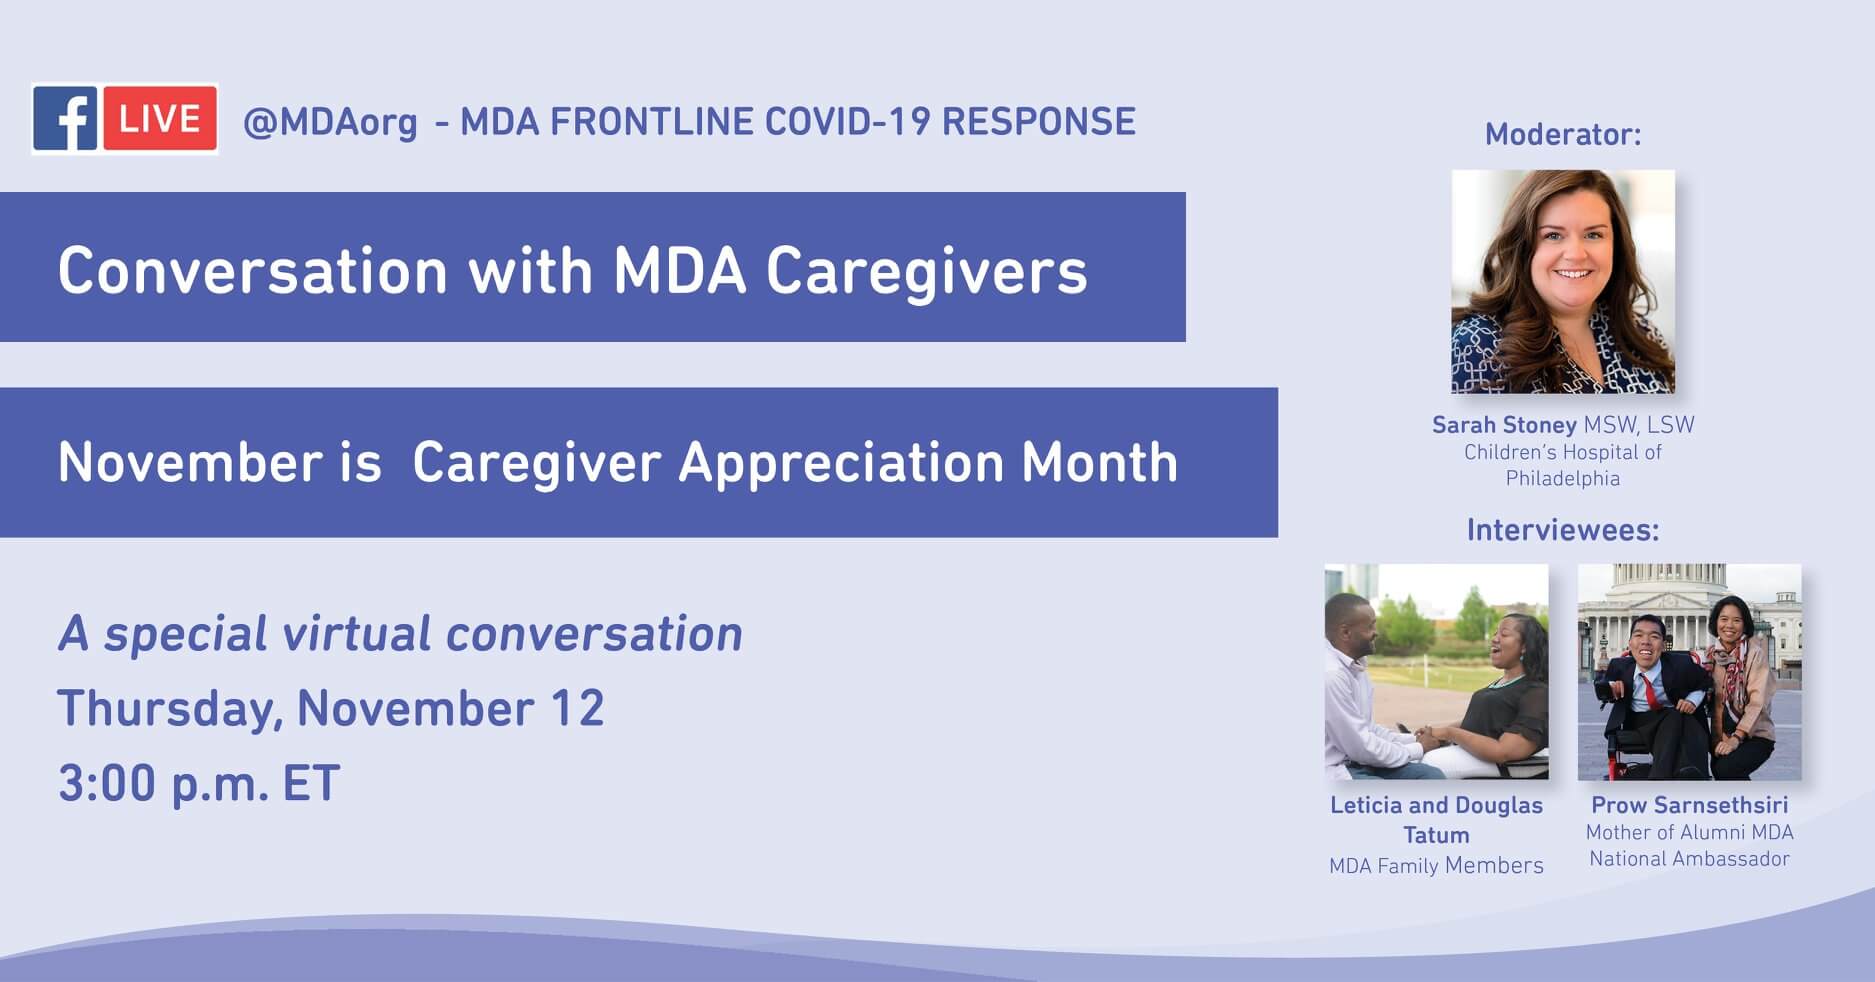 Conversation with MDA Caregivers: a special virtual conversation, now on YouTube.